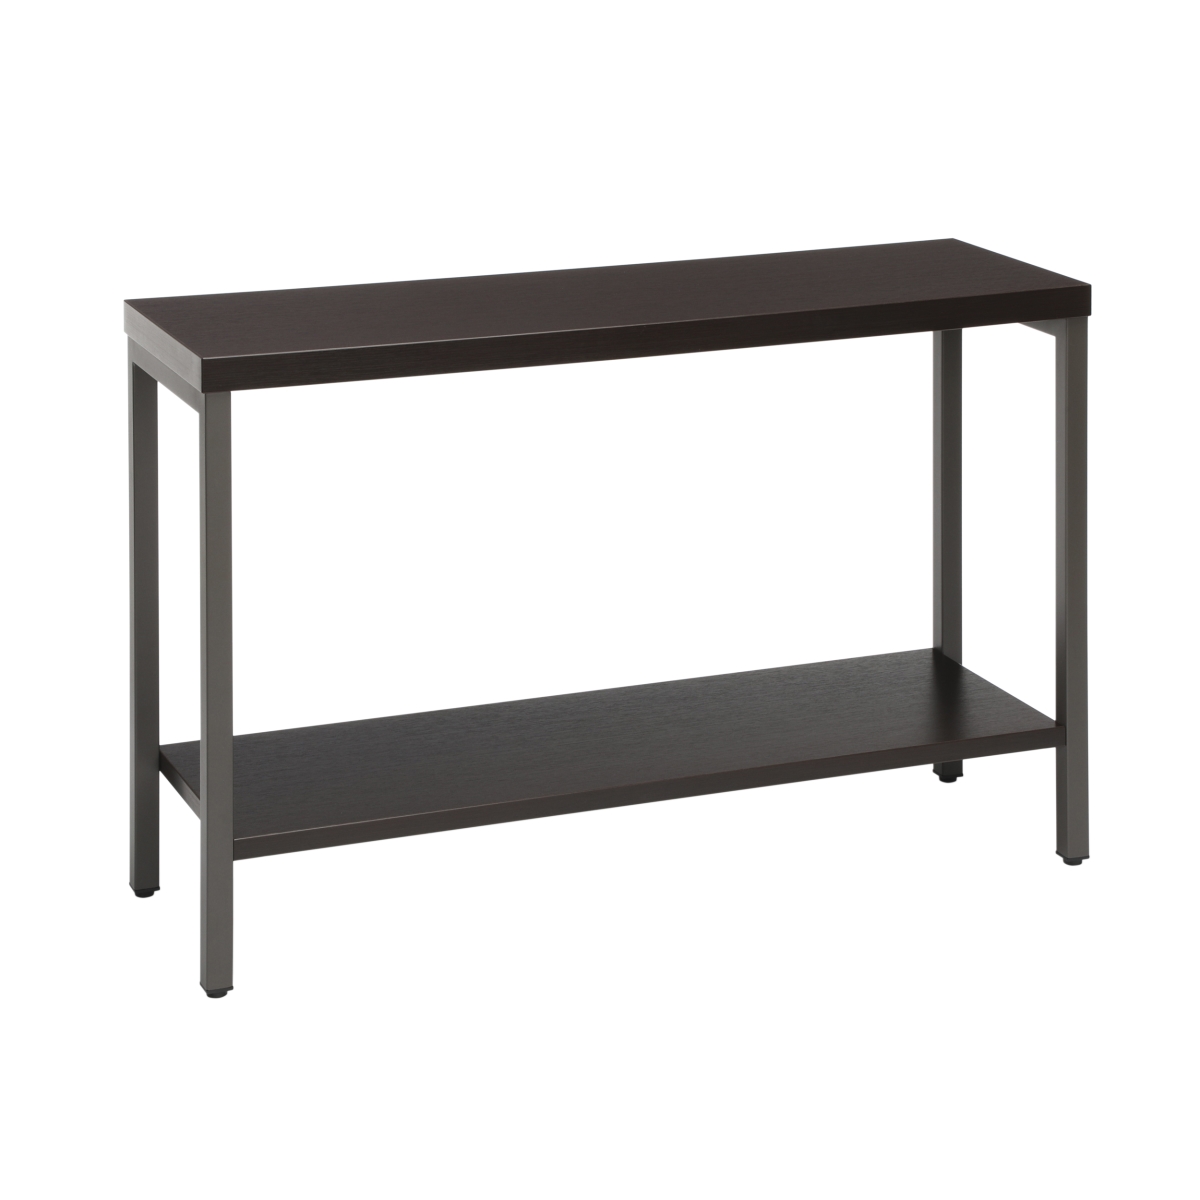 70003-blk-esp 44 In. Core Collection Modern Console Table With Shelf, Espresso